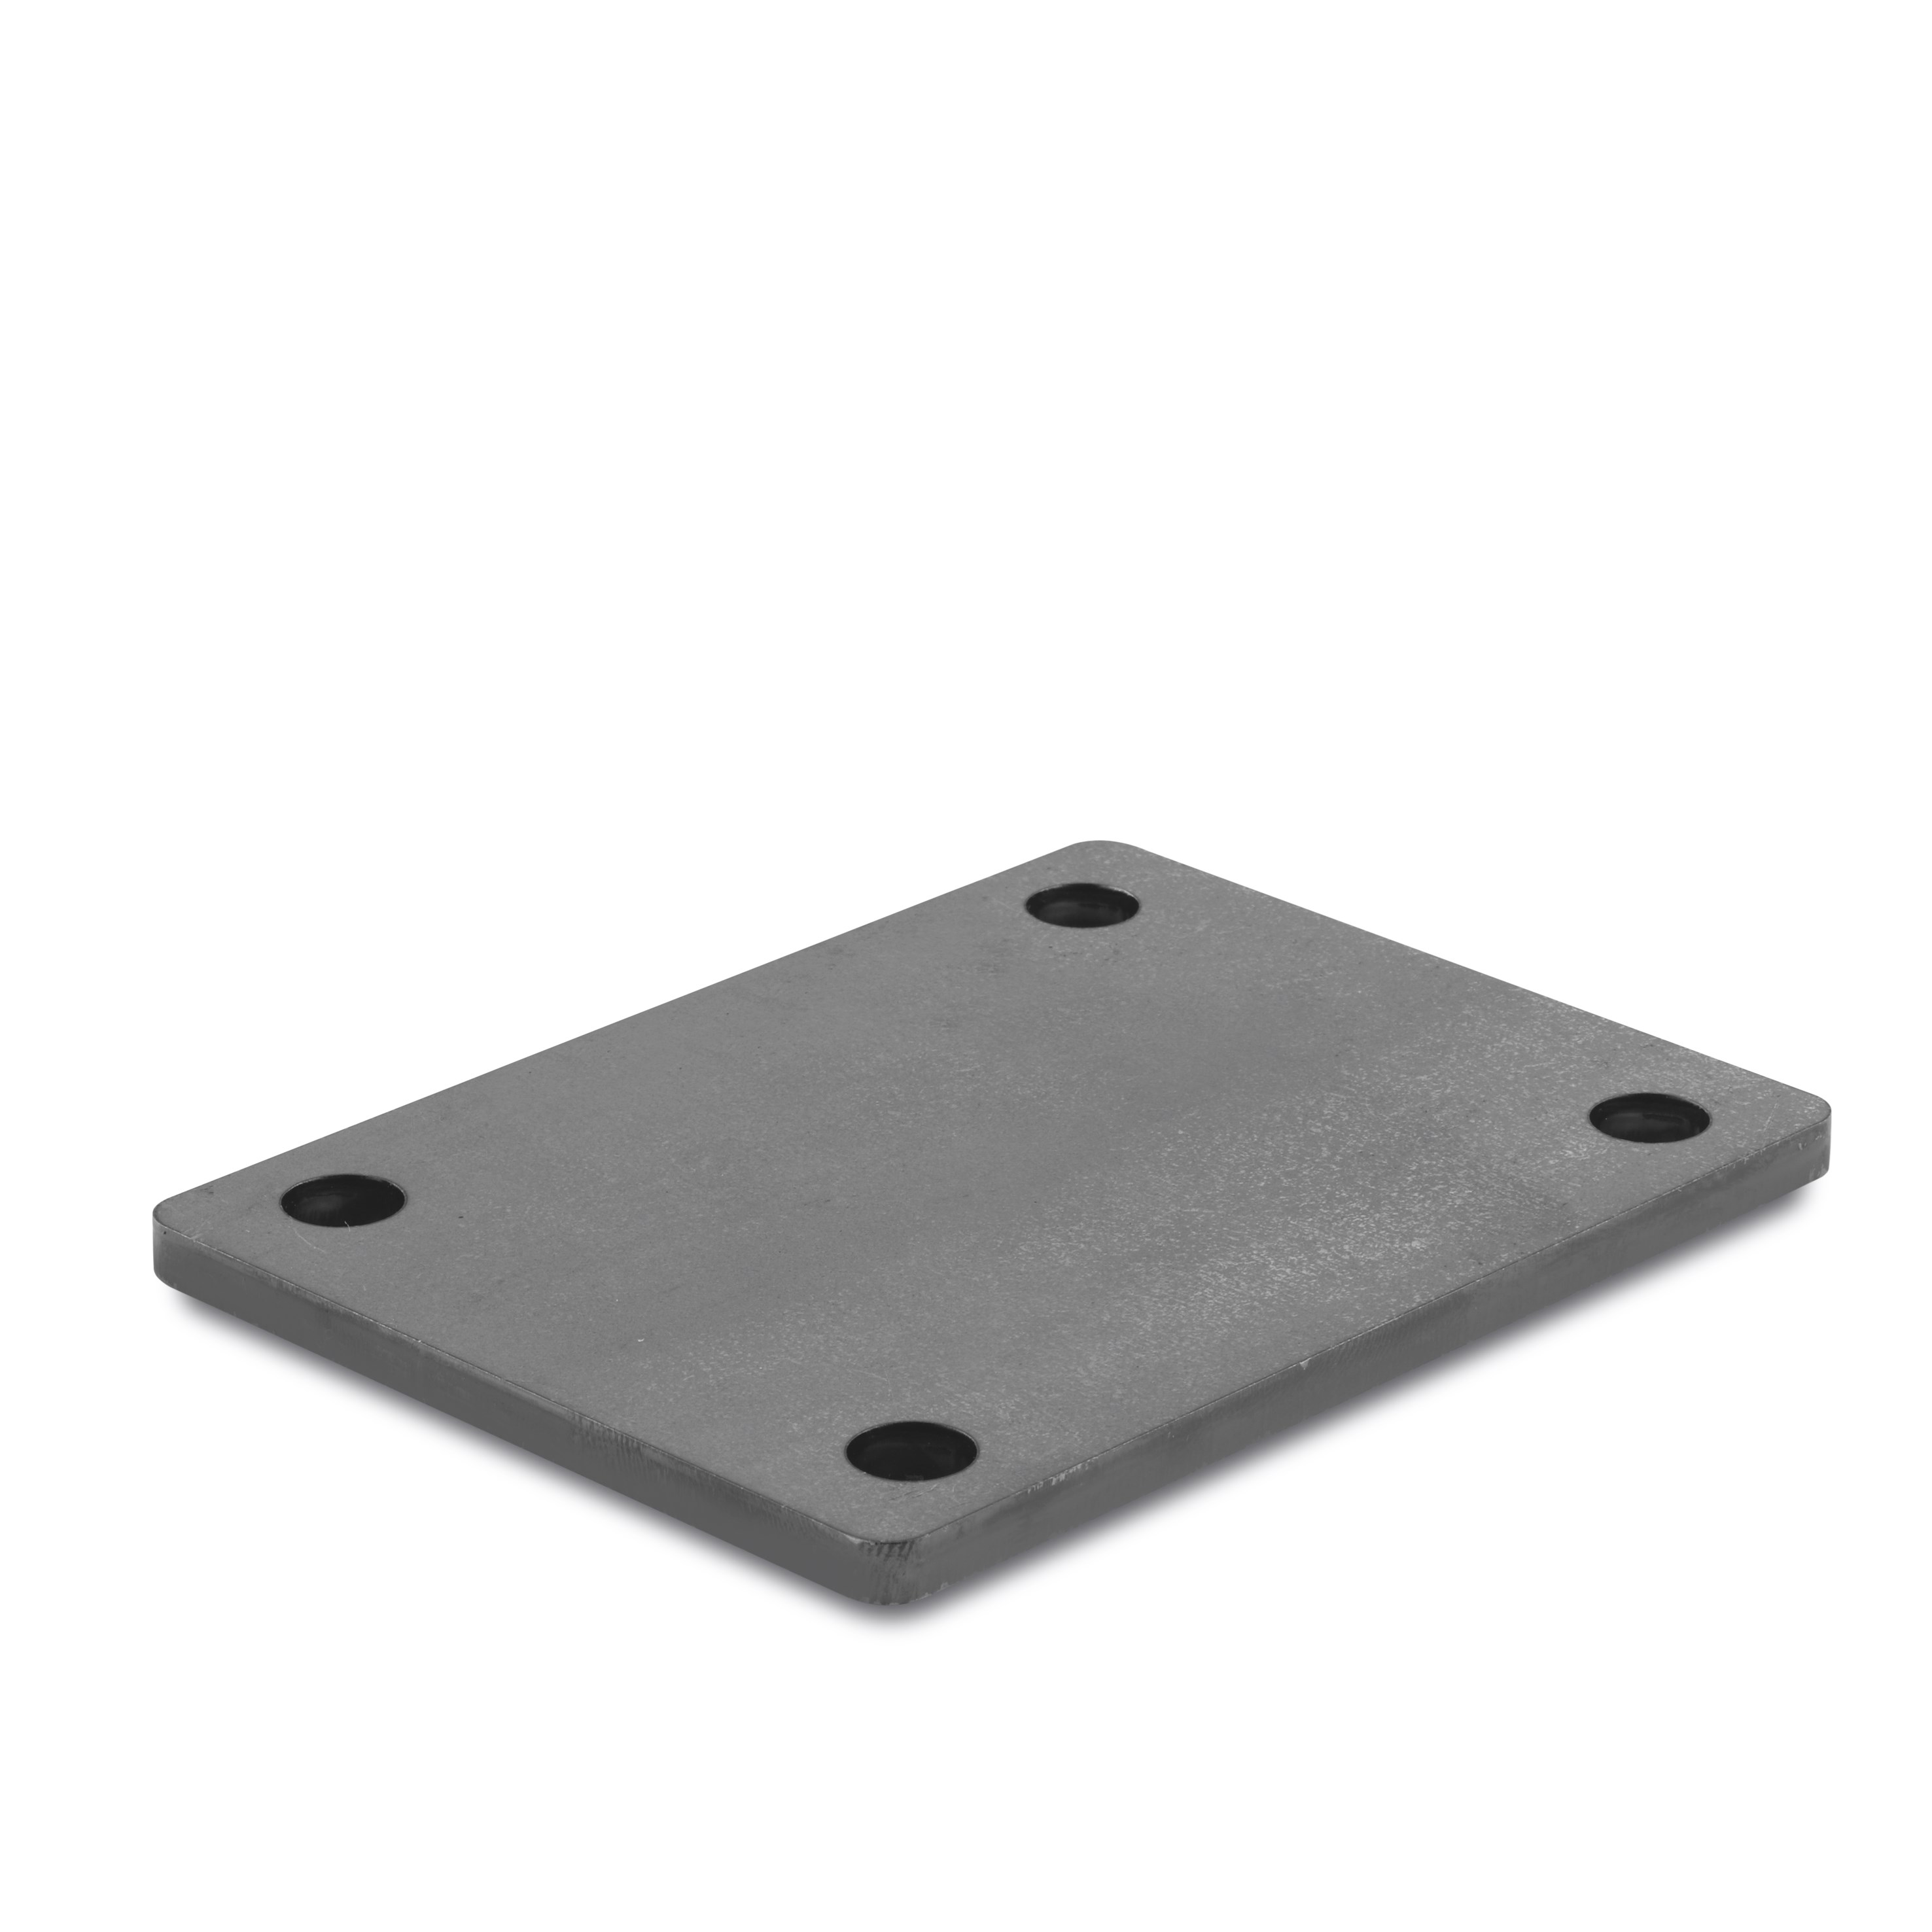 Mounting plates made of steel, galvanized